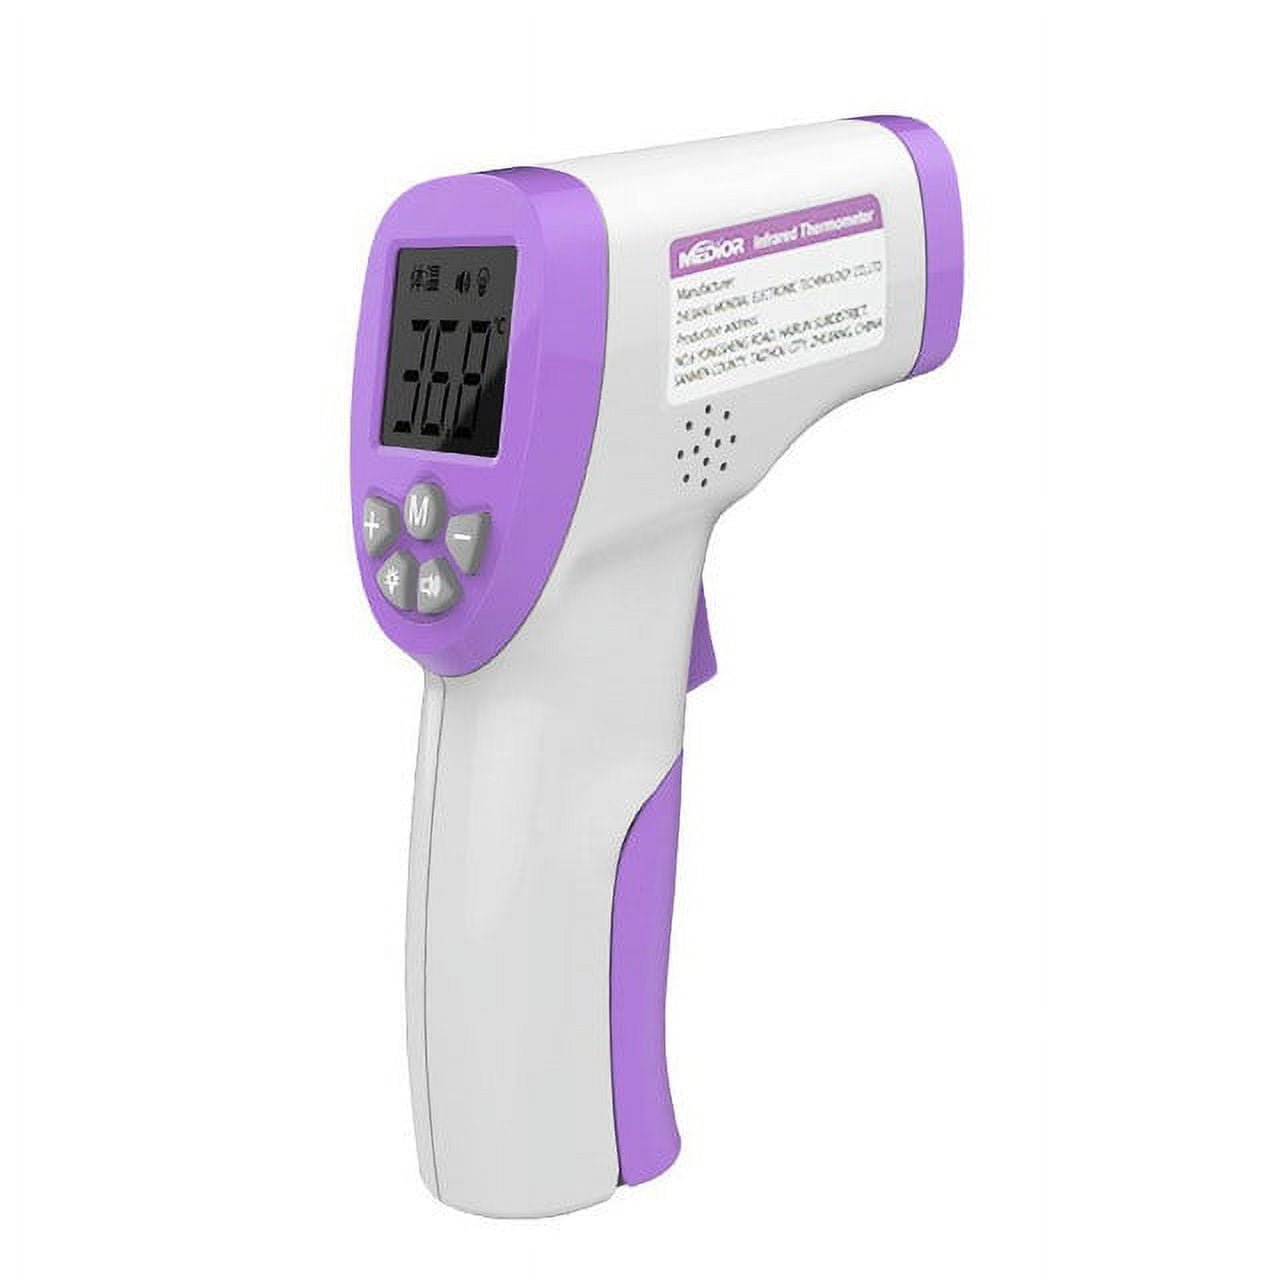 Generic Kizen LaserPro LP300 Infrared Thermometer Non-Contact Digital Laser  Temperature Gun with LCD Display -58&#